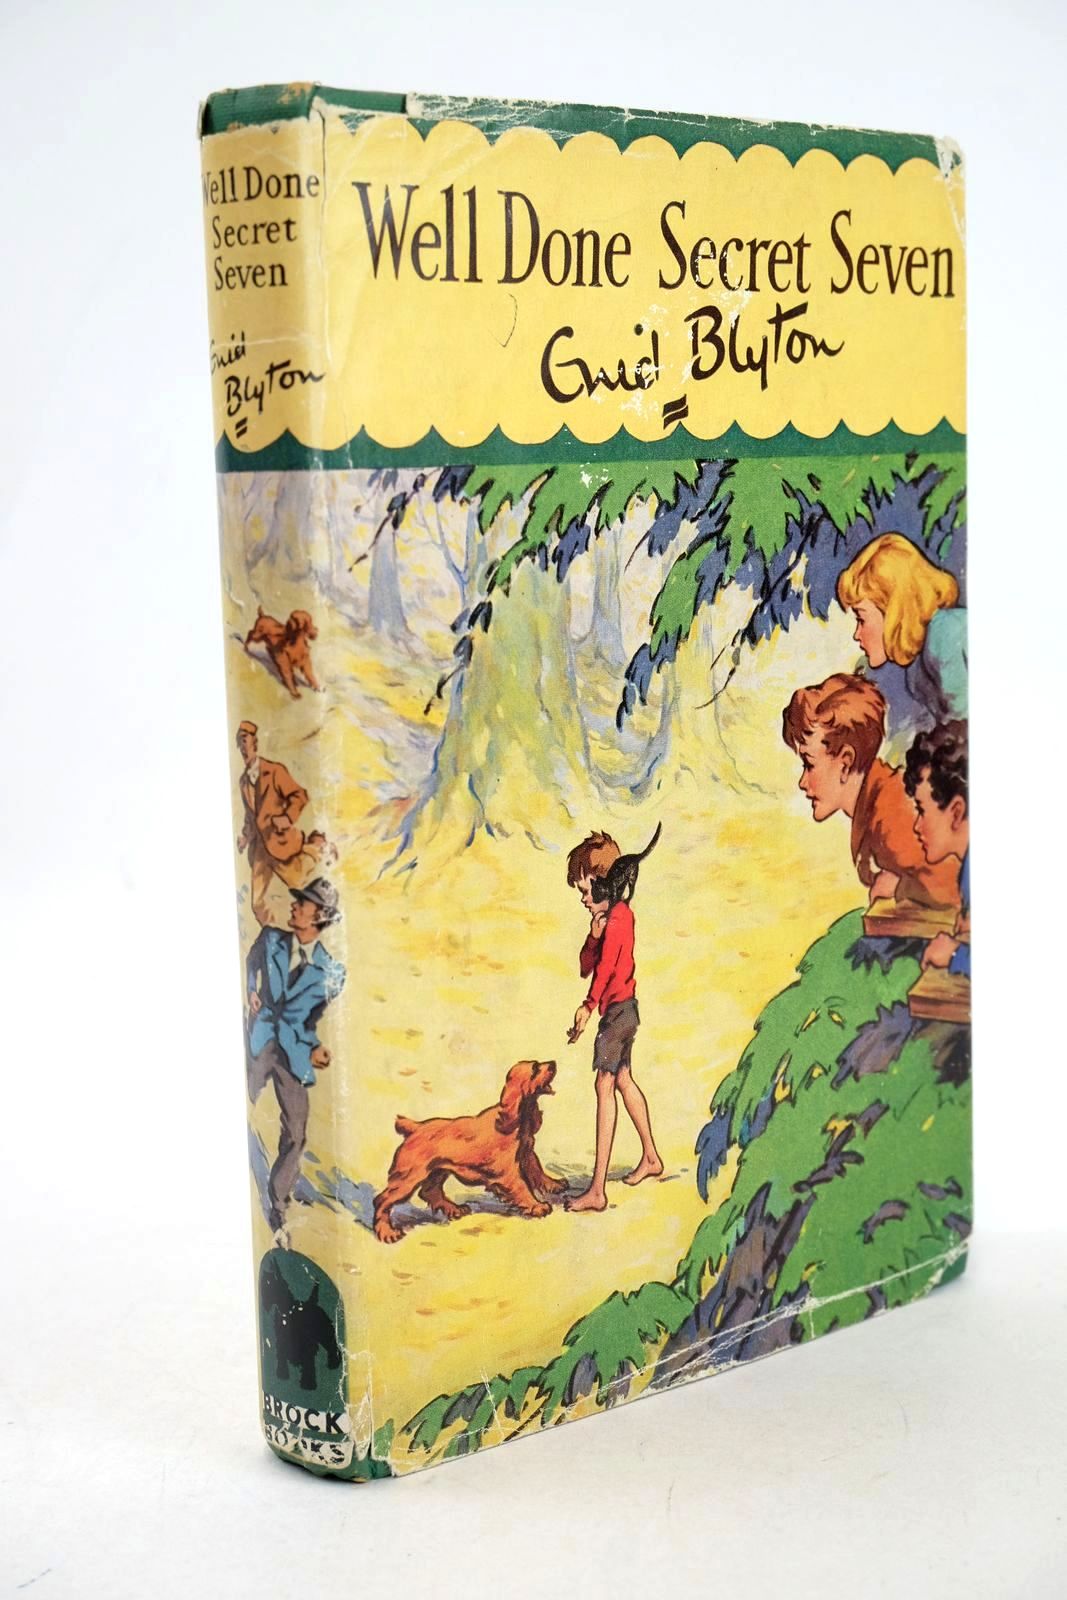 Photo of WELL DONE SECRET SEVEN written by Blyton, Enid illustrated by Brook, George published by Brockhampton Press Ltd. (STOCK CODE: 1326881)  for sale by Stella & Rose's Books